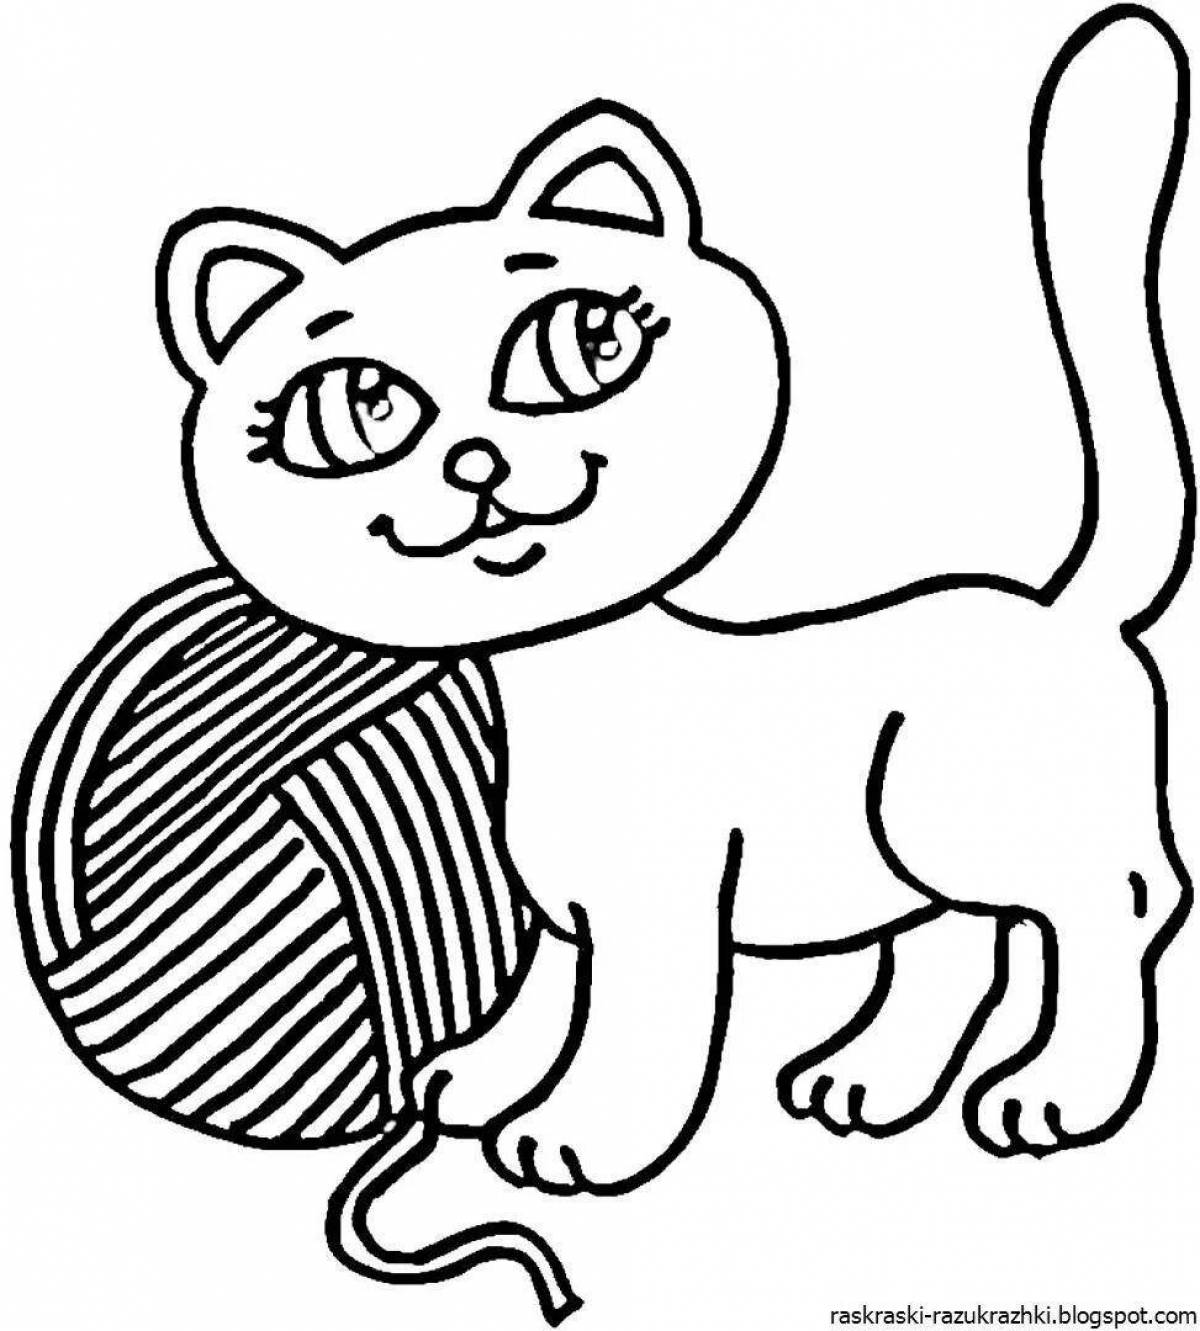 Playful kitty coloring book for 2-3 year olds